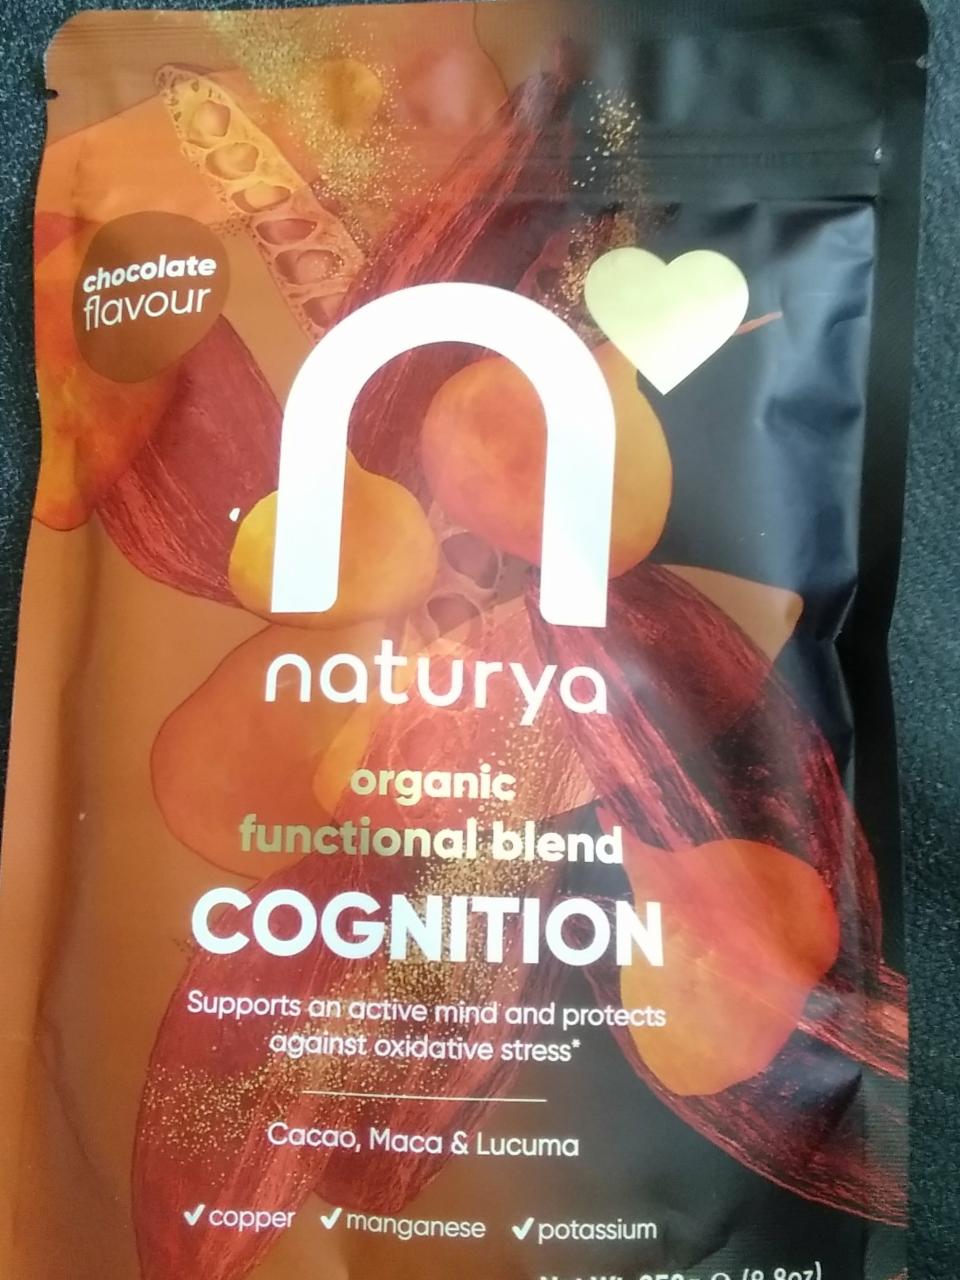 Fotografie - Organic Functional Blend Cognition Chocolate flavour Naturya